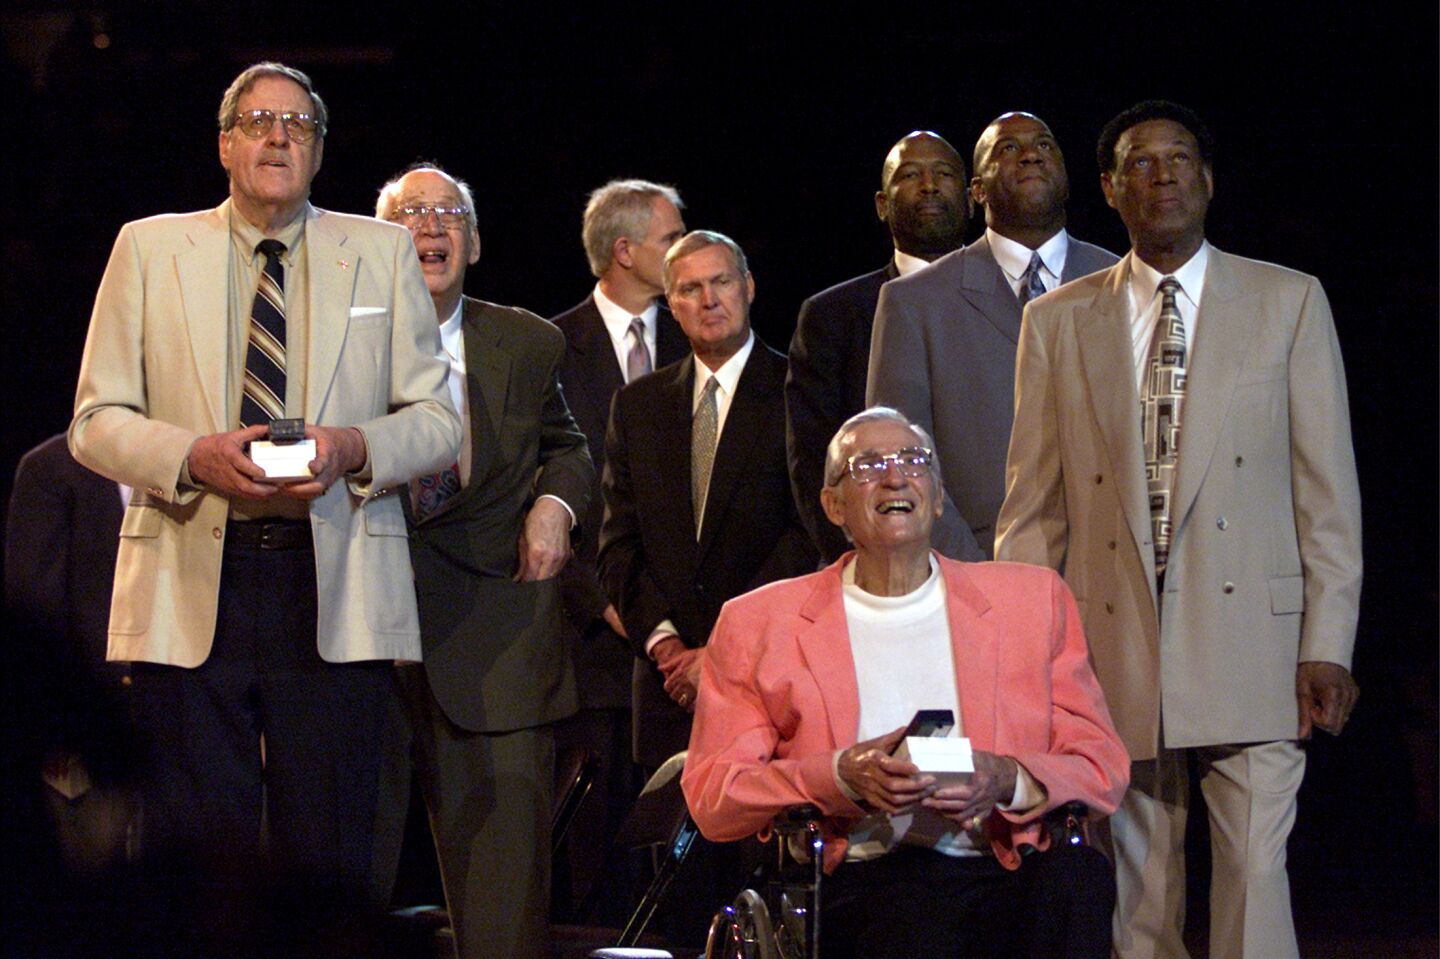 Members of the Minneapolis Lakers Hall of Fame George Mikan, Vern Mikkelsen, Slater Martin, Clyde Lovellette, Coach John Kundla and members of the Los Angeles Lakers Mitch Kupchak, Jerry West, James Worthy, Earvin "Magic" Johnson and Elgin Baylor watch the raising of the Minneapolis banner Thursday at the Staples Center in April of 2002.